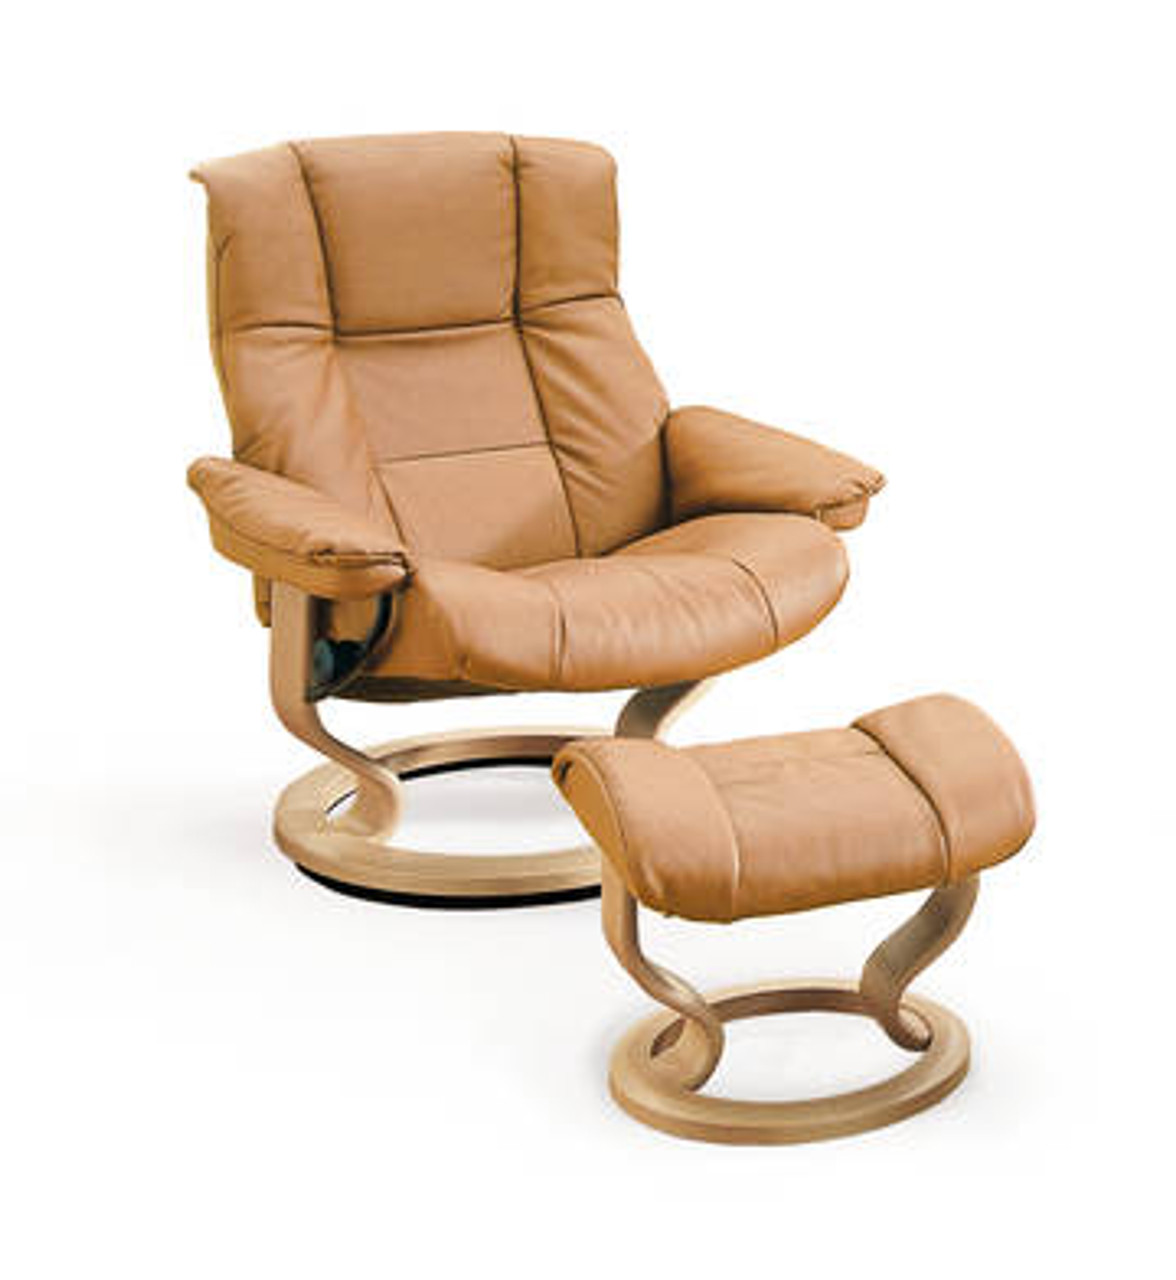 | & Recliners Mayfair Chairs Stress-free Stressless Ekornes Delivery